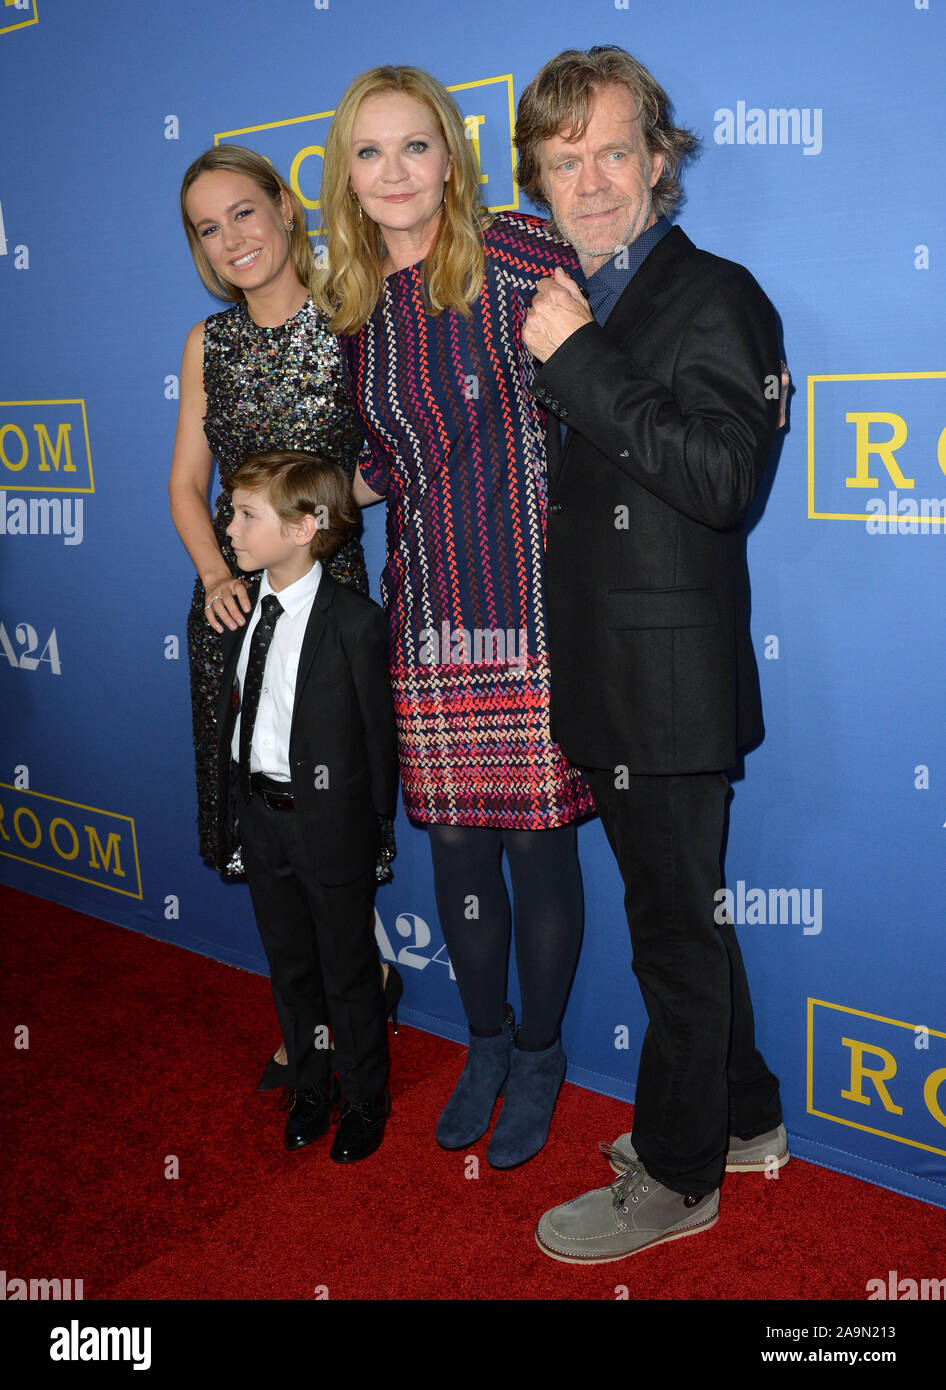 LOS ANGELES, CA. October 13, 2015: William H. Macy, Brie Larson, Joan Allen & Jacob Tremblay at the Los Angeles premiere of their movie 'Room' at the Pacific Design Centre, West Hollywood. © 2015: Paul Smith / Featureflash Stock Photo